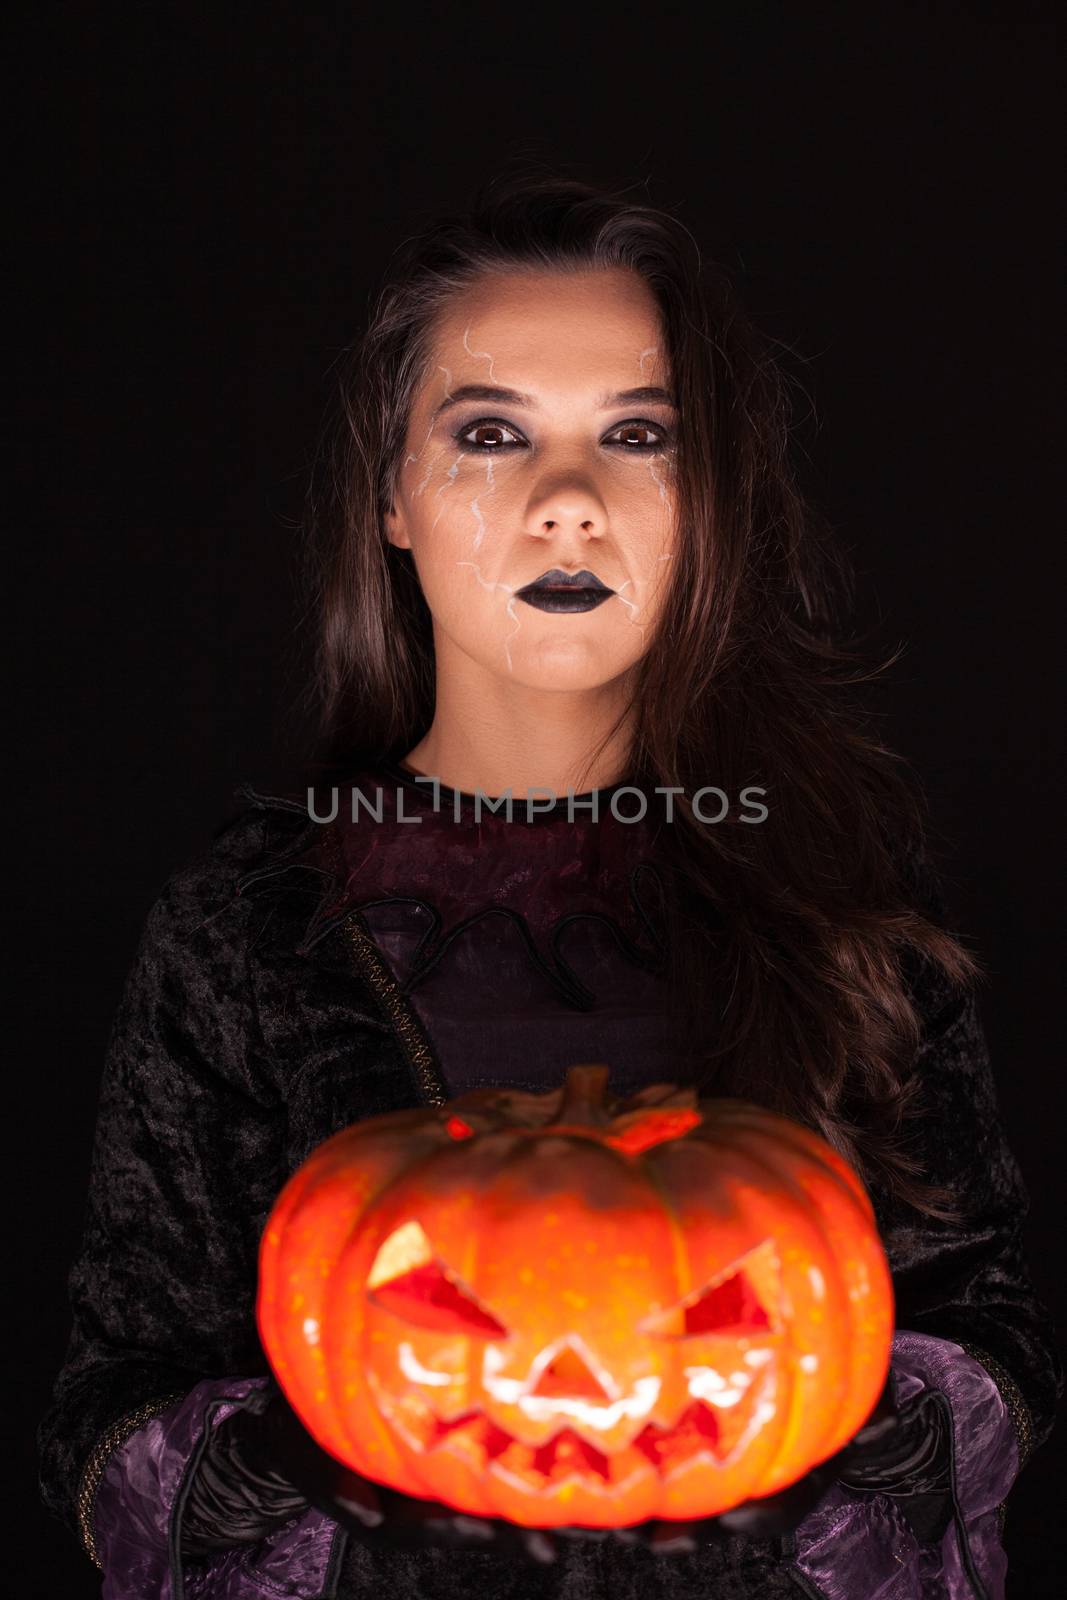 Attractive woman with a serious face dressed up like a witch by DCStudio